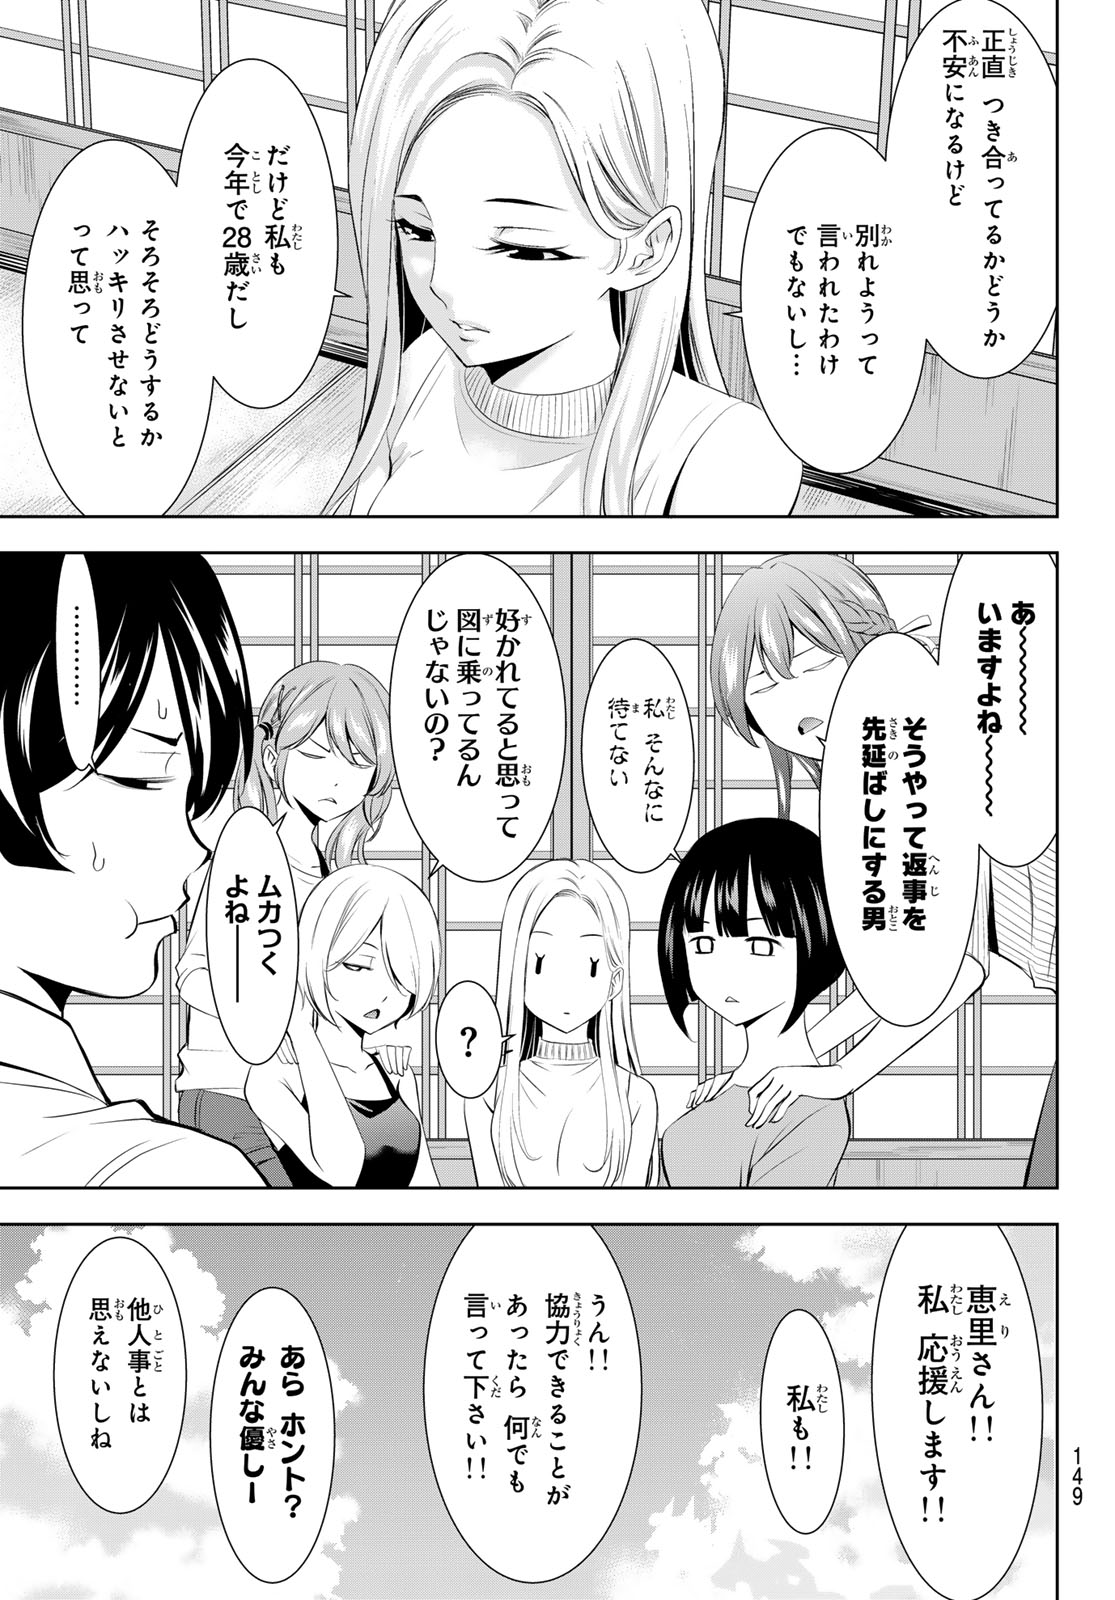 Megami no Cafe Terace - Chapter 151 - Page 6